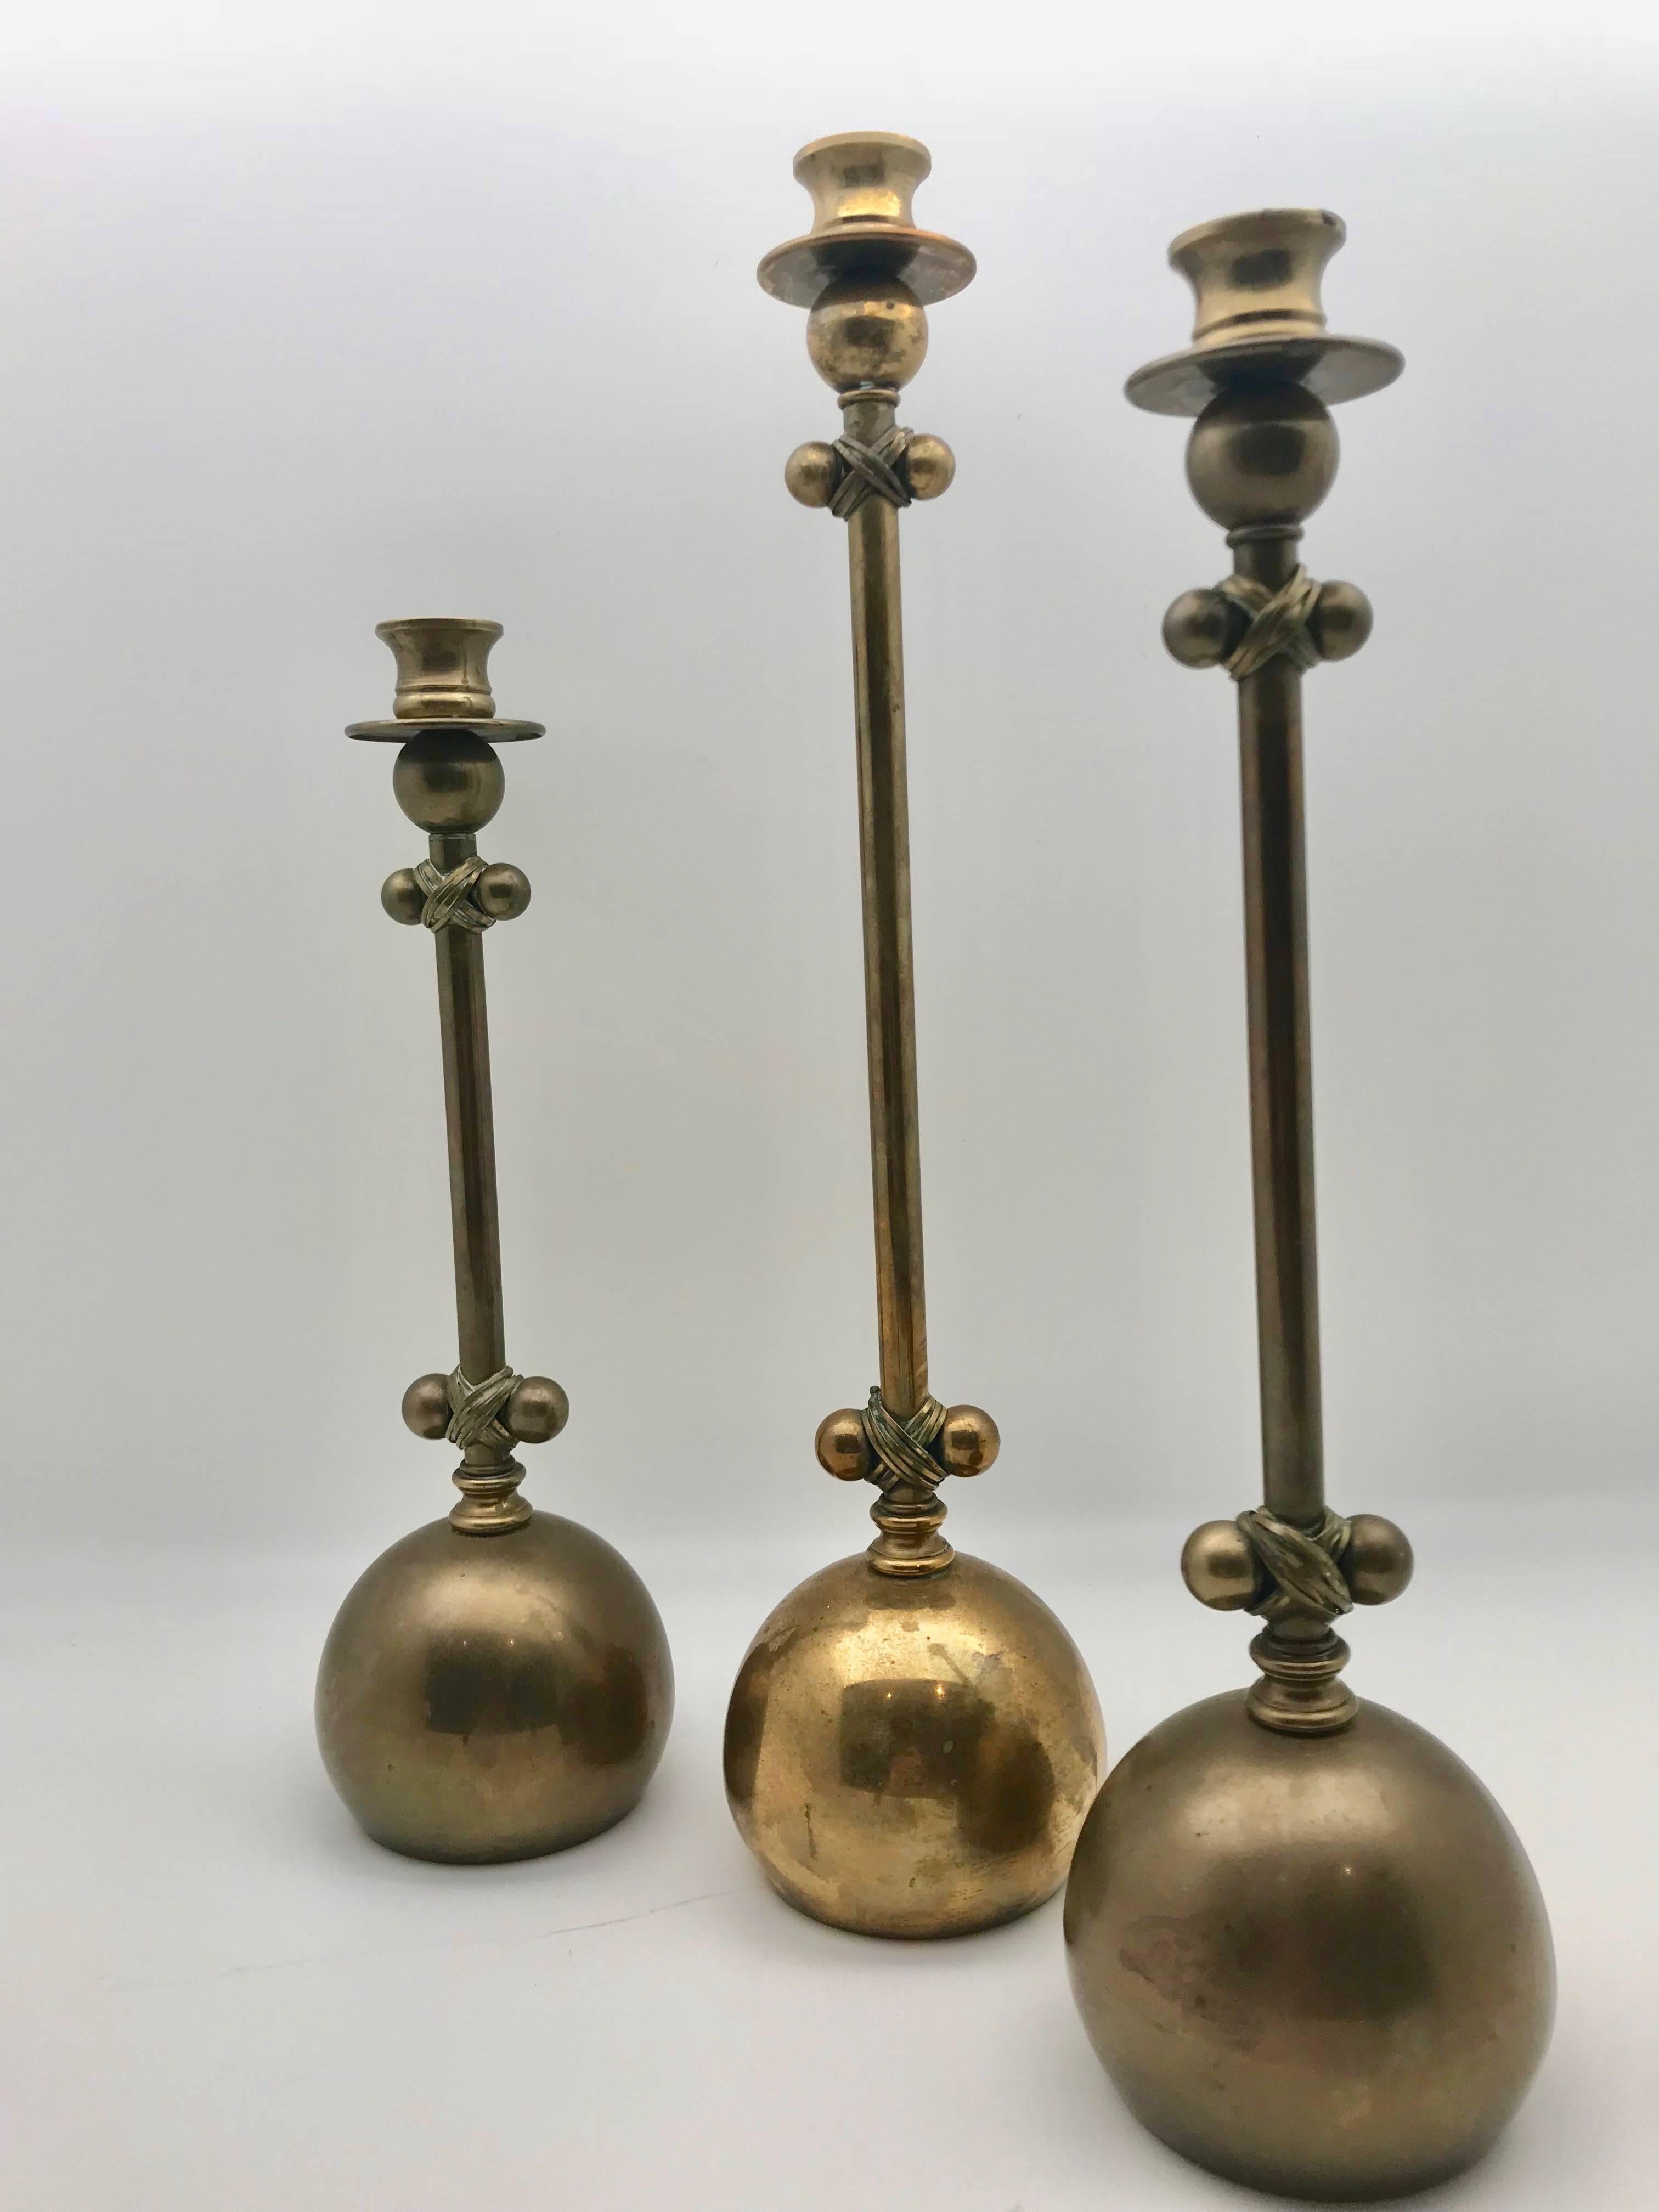 An unusual set of three midcentury brass six balled candlesticks, attributed to Chapman Co. All three have different heights- 17